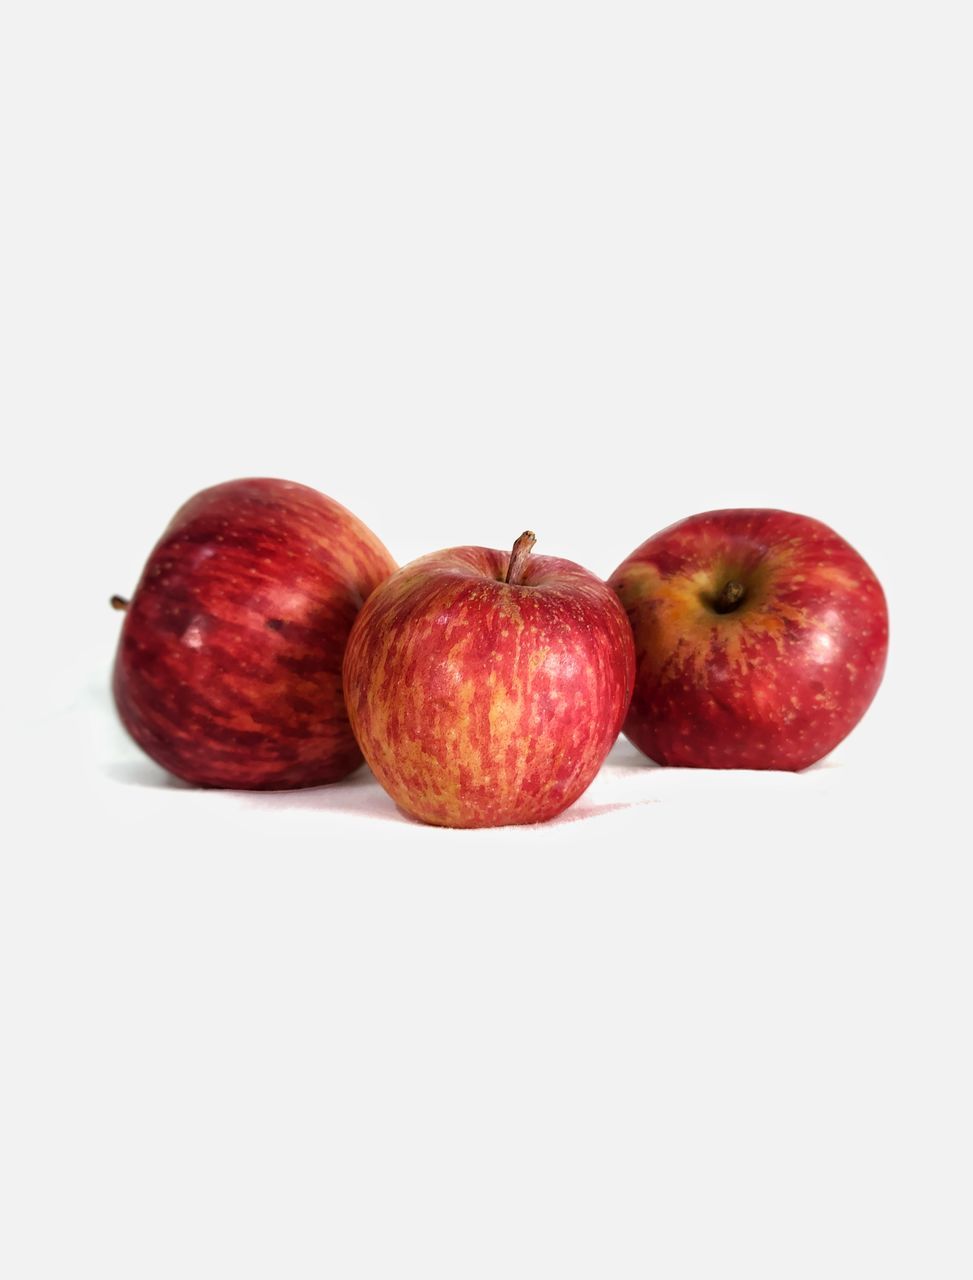 food and drink, food, healthy eating, fruit, wellbeing, freshness, studio shot, produce, red, apple - fruit, indoors, cut out, plant, apple, white background, no people, close-up, group of objects, copy space, still life, organic, ripe